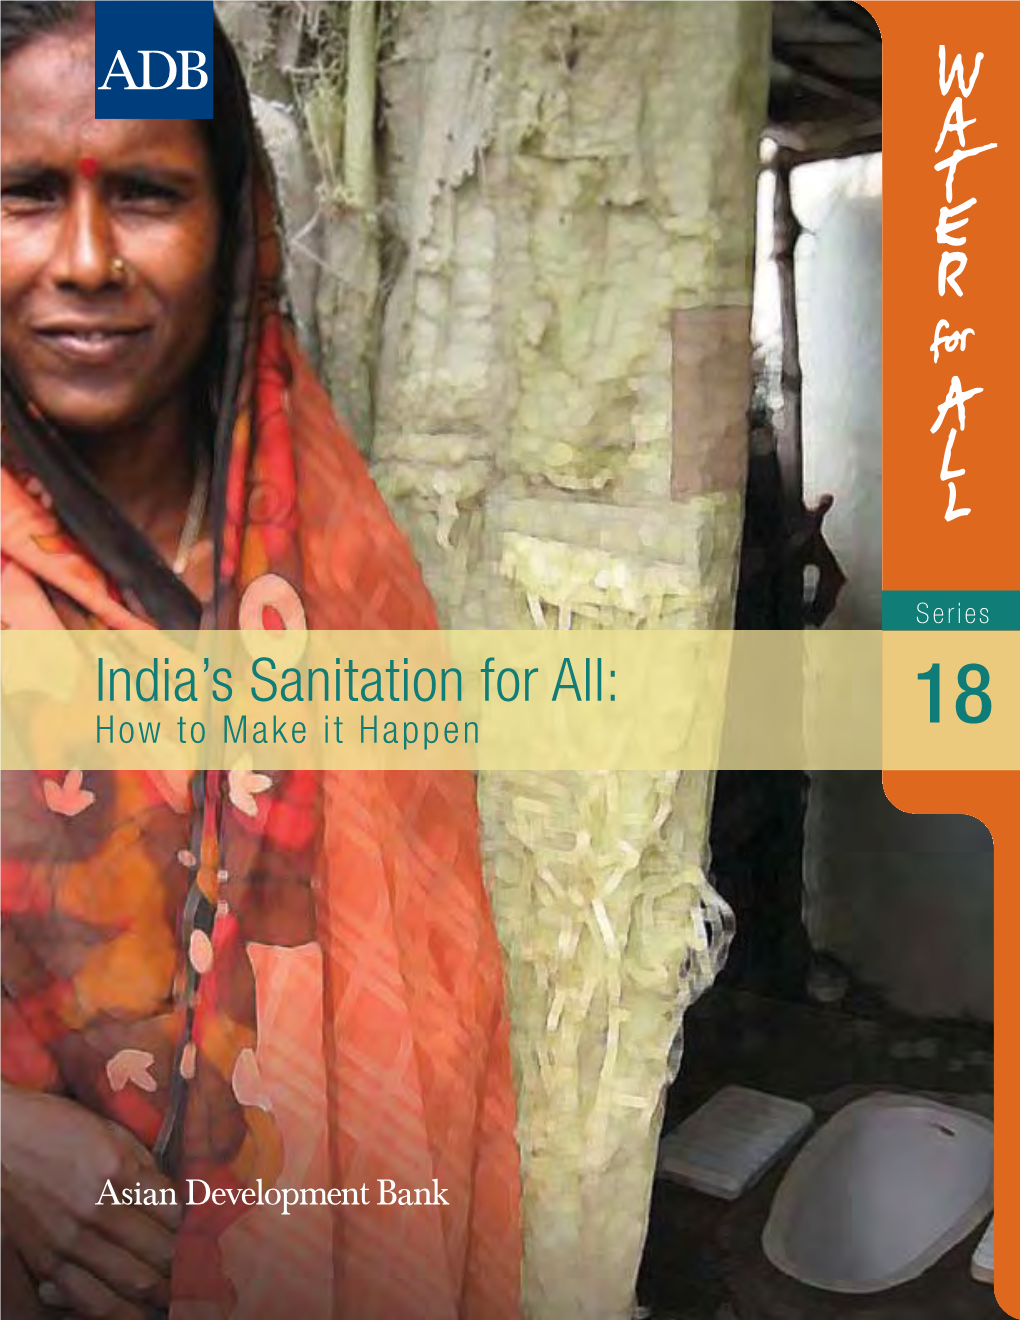 India's Sanitation for All: How to Make It Happen